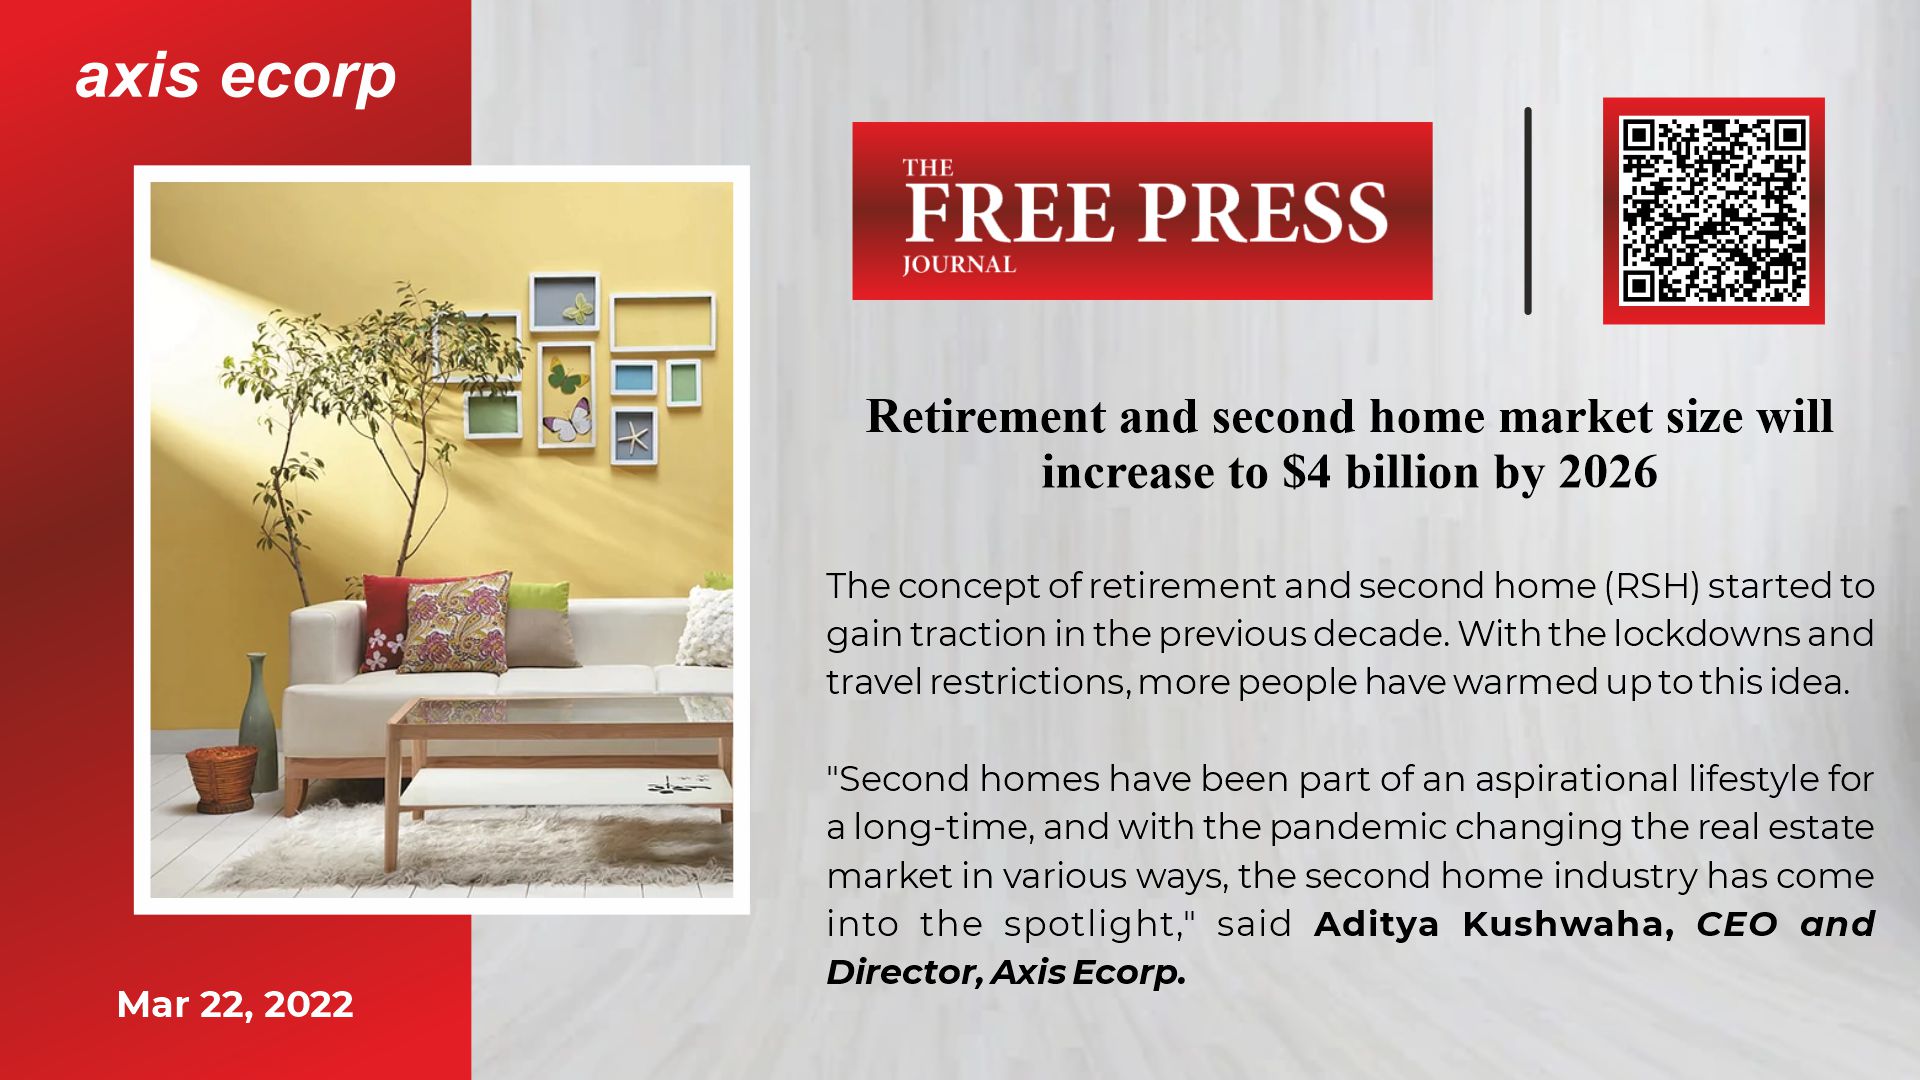 Retirement, second home market size to increase to $4 bn by 2026